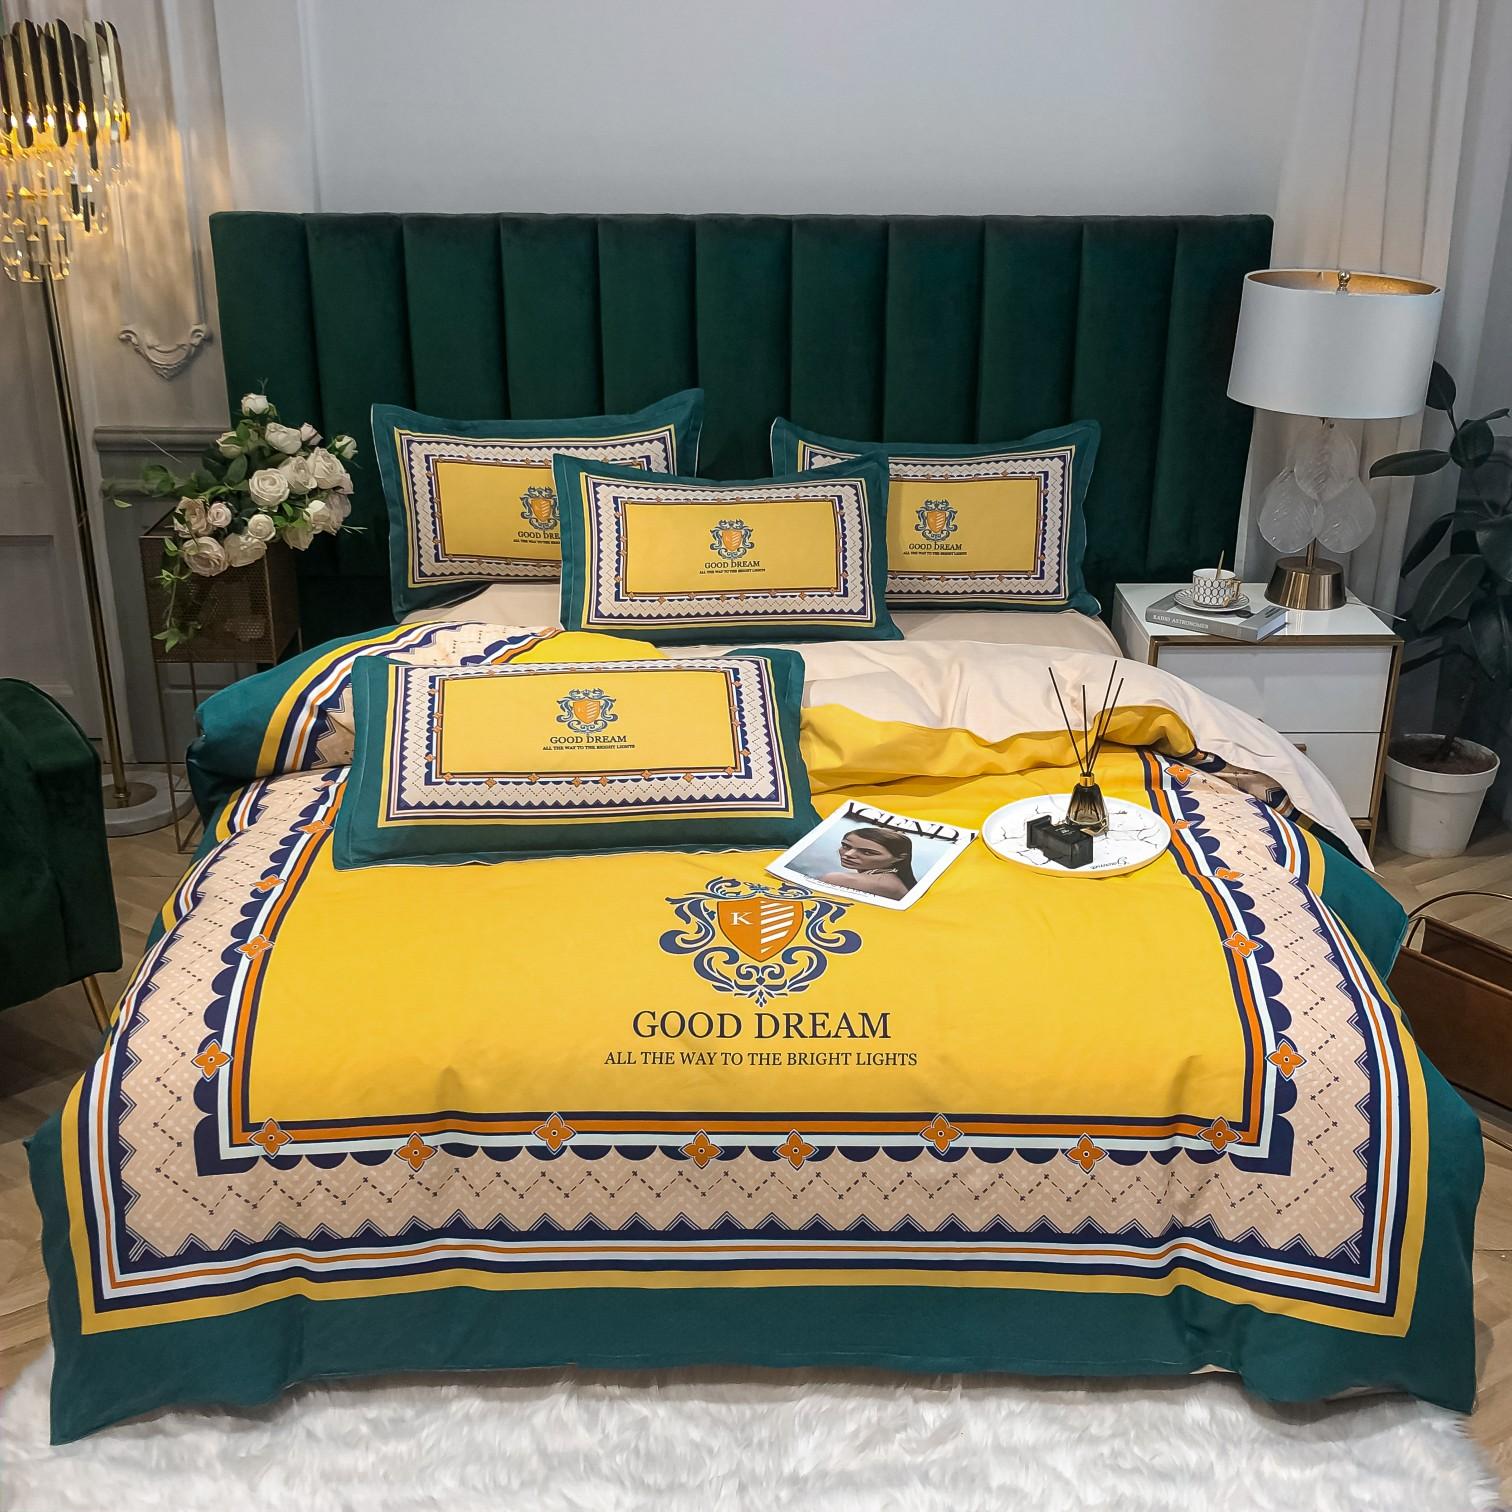 

Yellow Designer Bedding Sets Cover Bohemia Fashion Printed Cotton Queen Size High Quality Luxury Bed Comforters Set, Same as pic